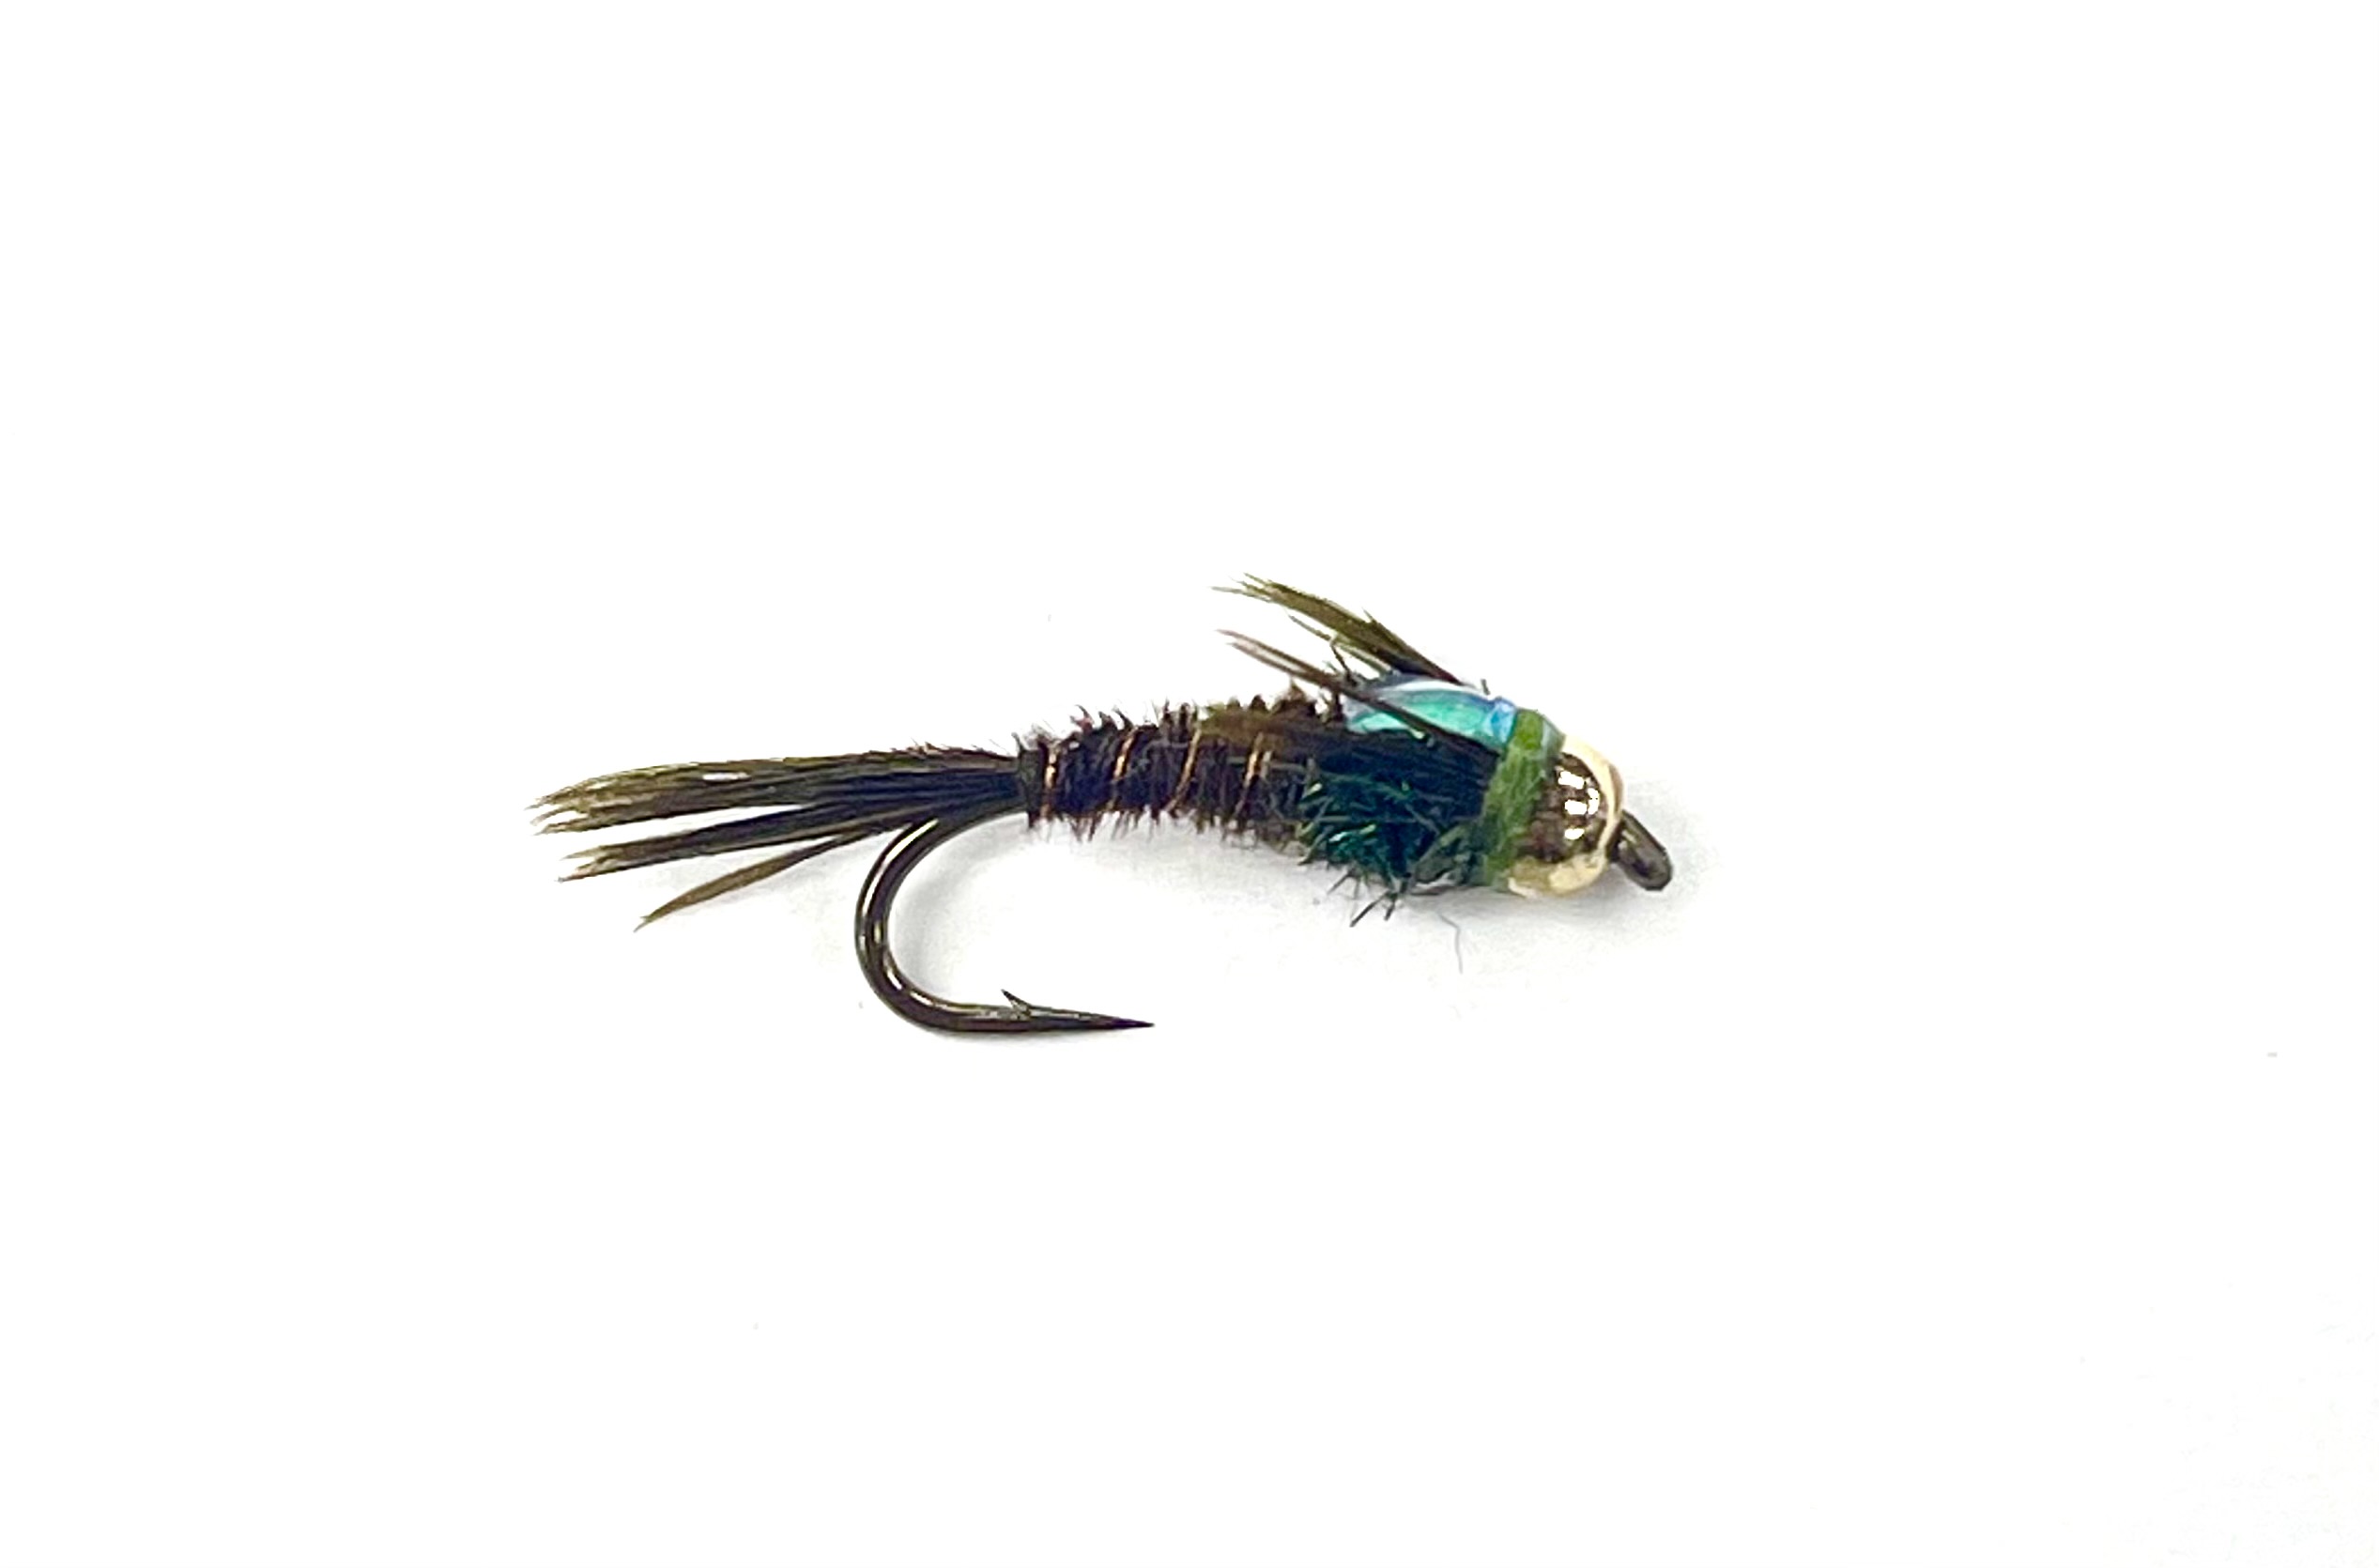 FAD GB Flashback Pheasant Tail Nymph - Olive - Size 12